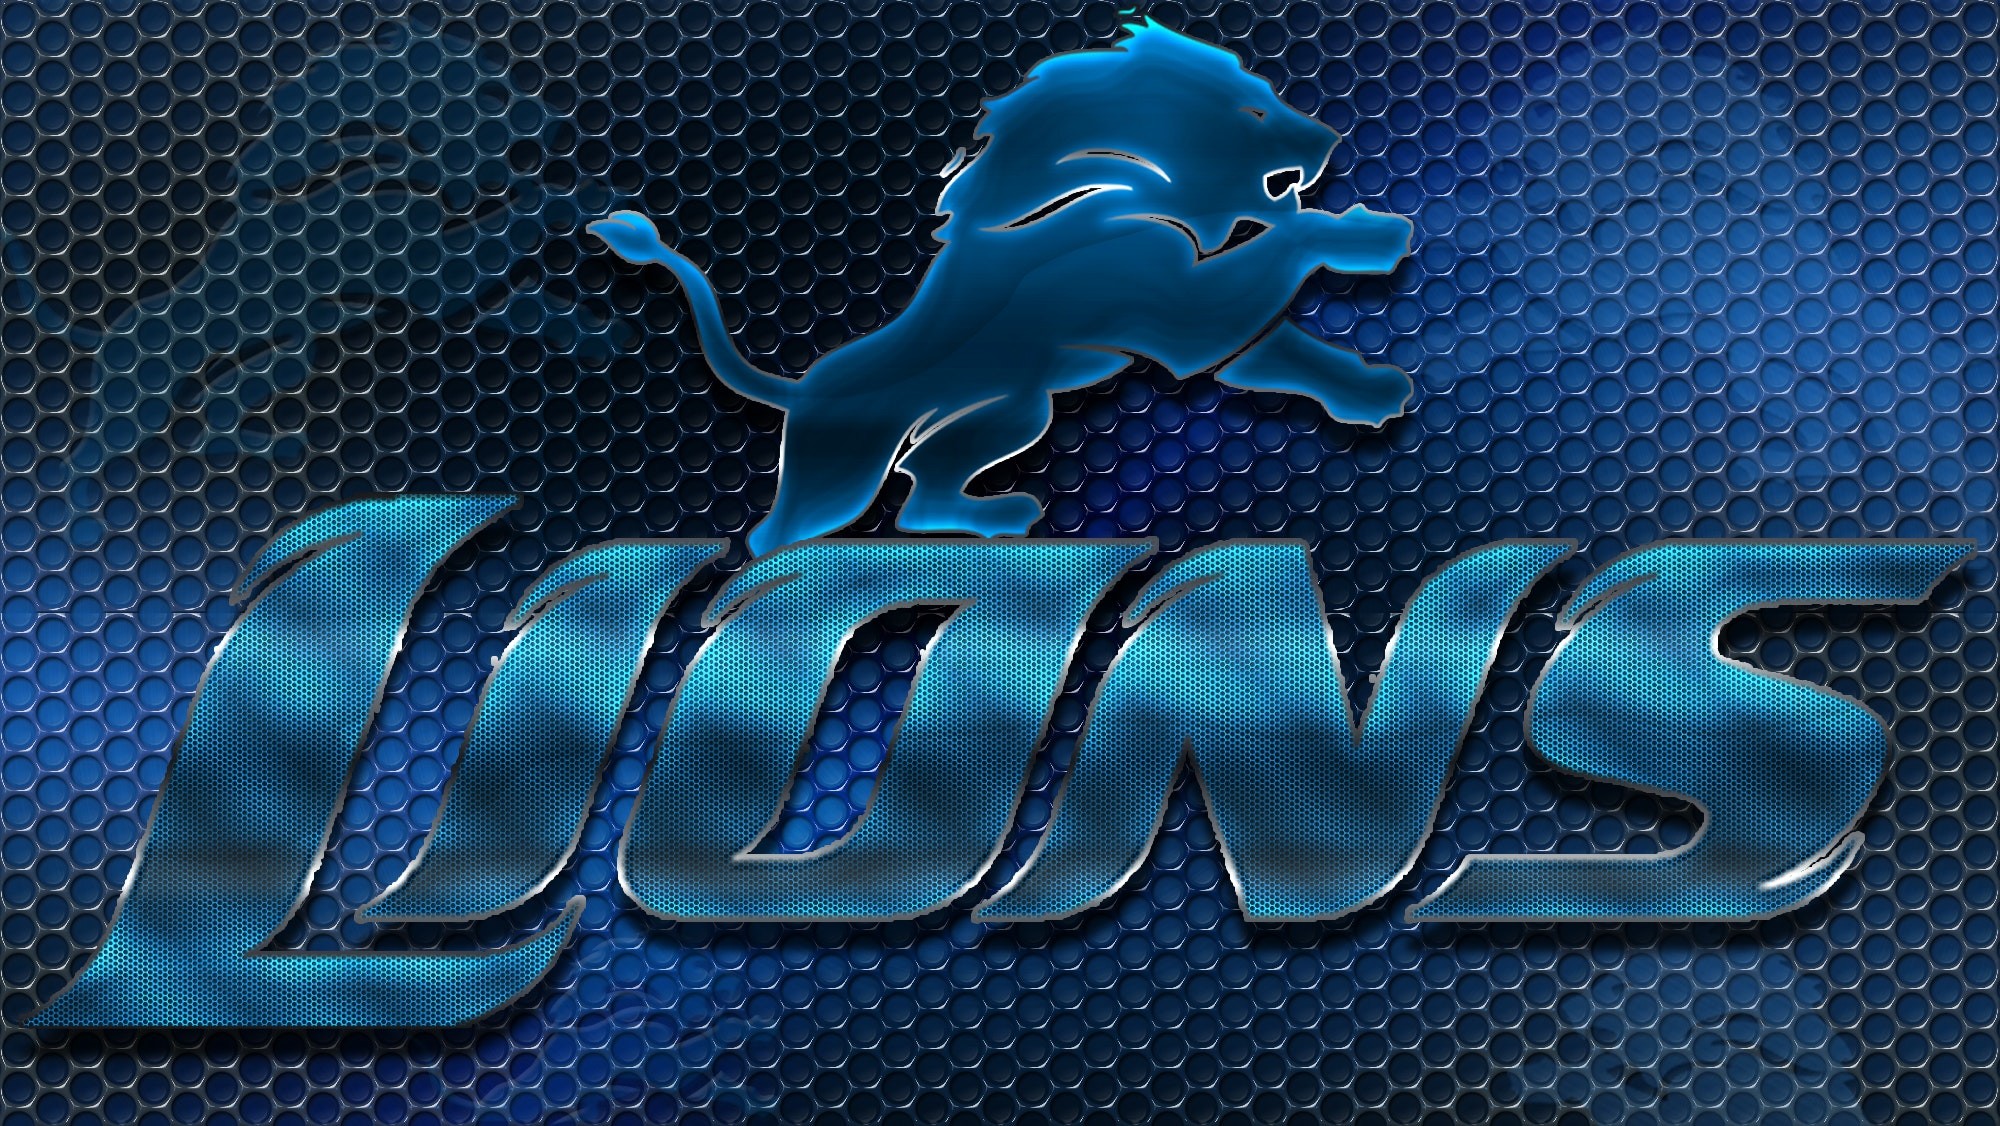 2000x1126 Stunning Detroit Lions Poster And Good Ideas Of DETROIT LIONS Nfl Football  Wallpaper Posters 15